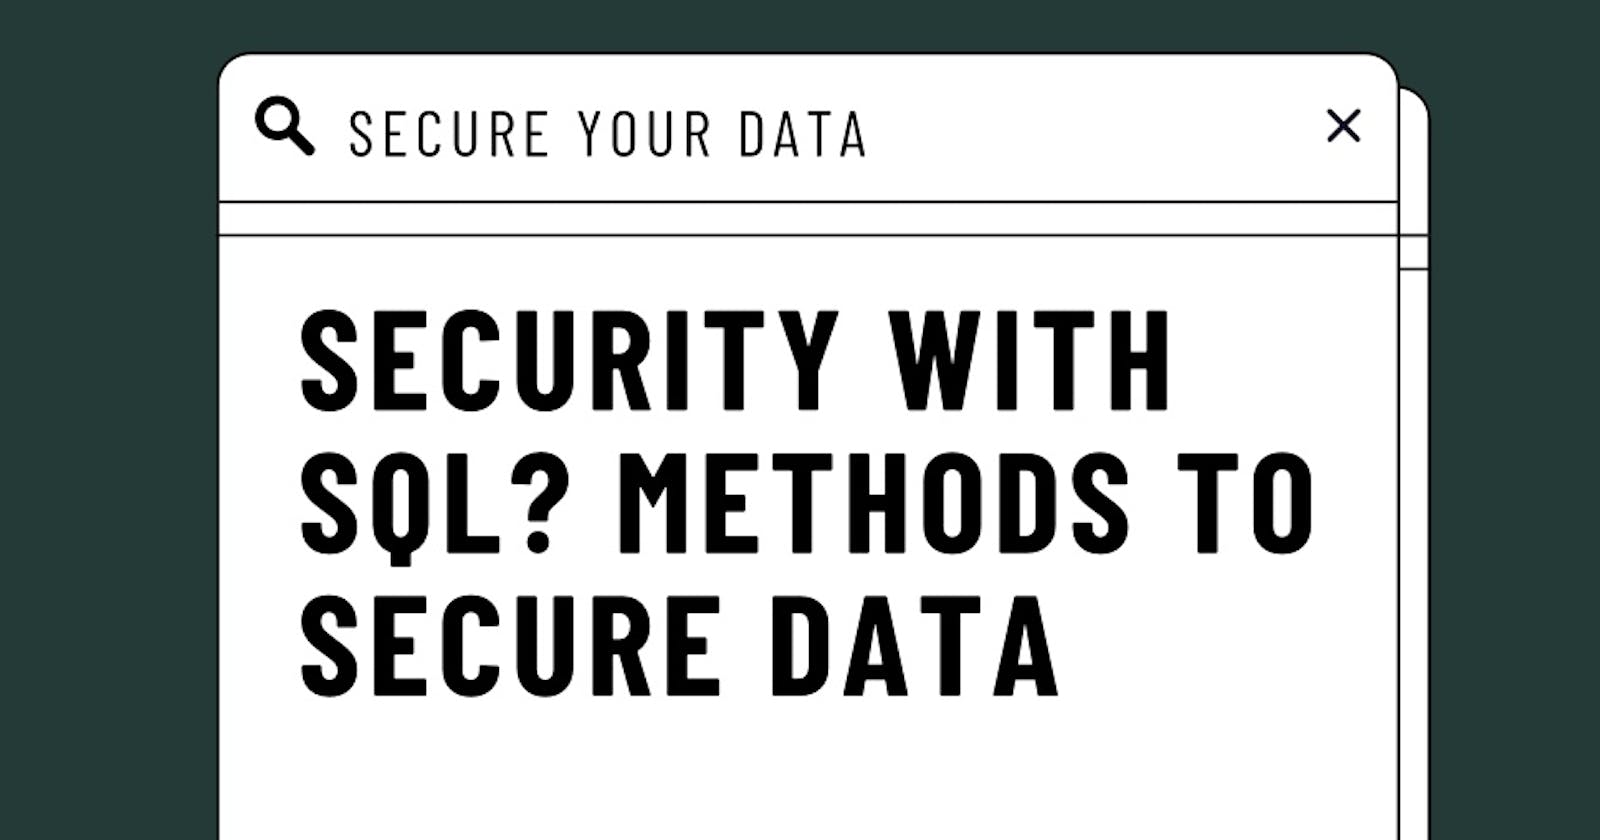 Security with SQL? Methods to prevent business data from threats